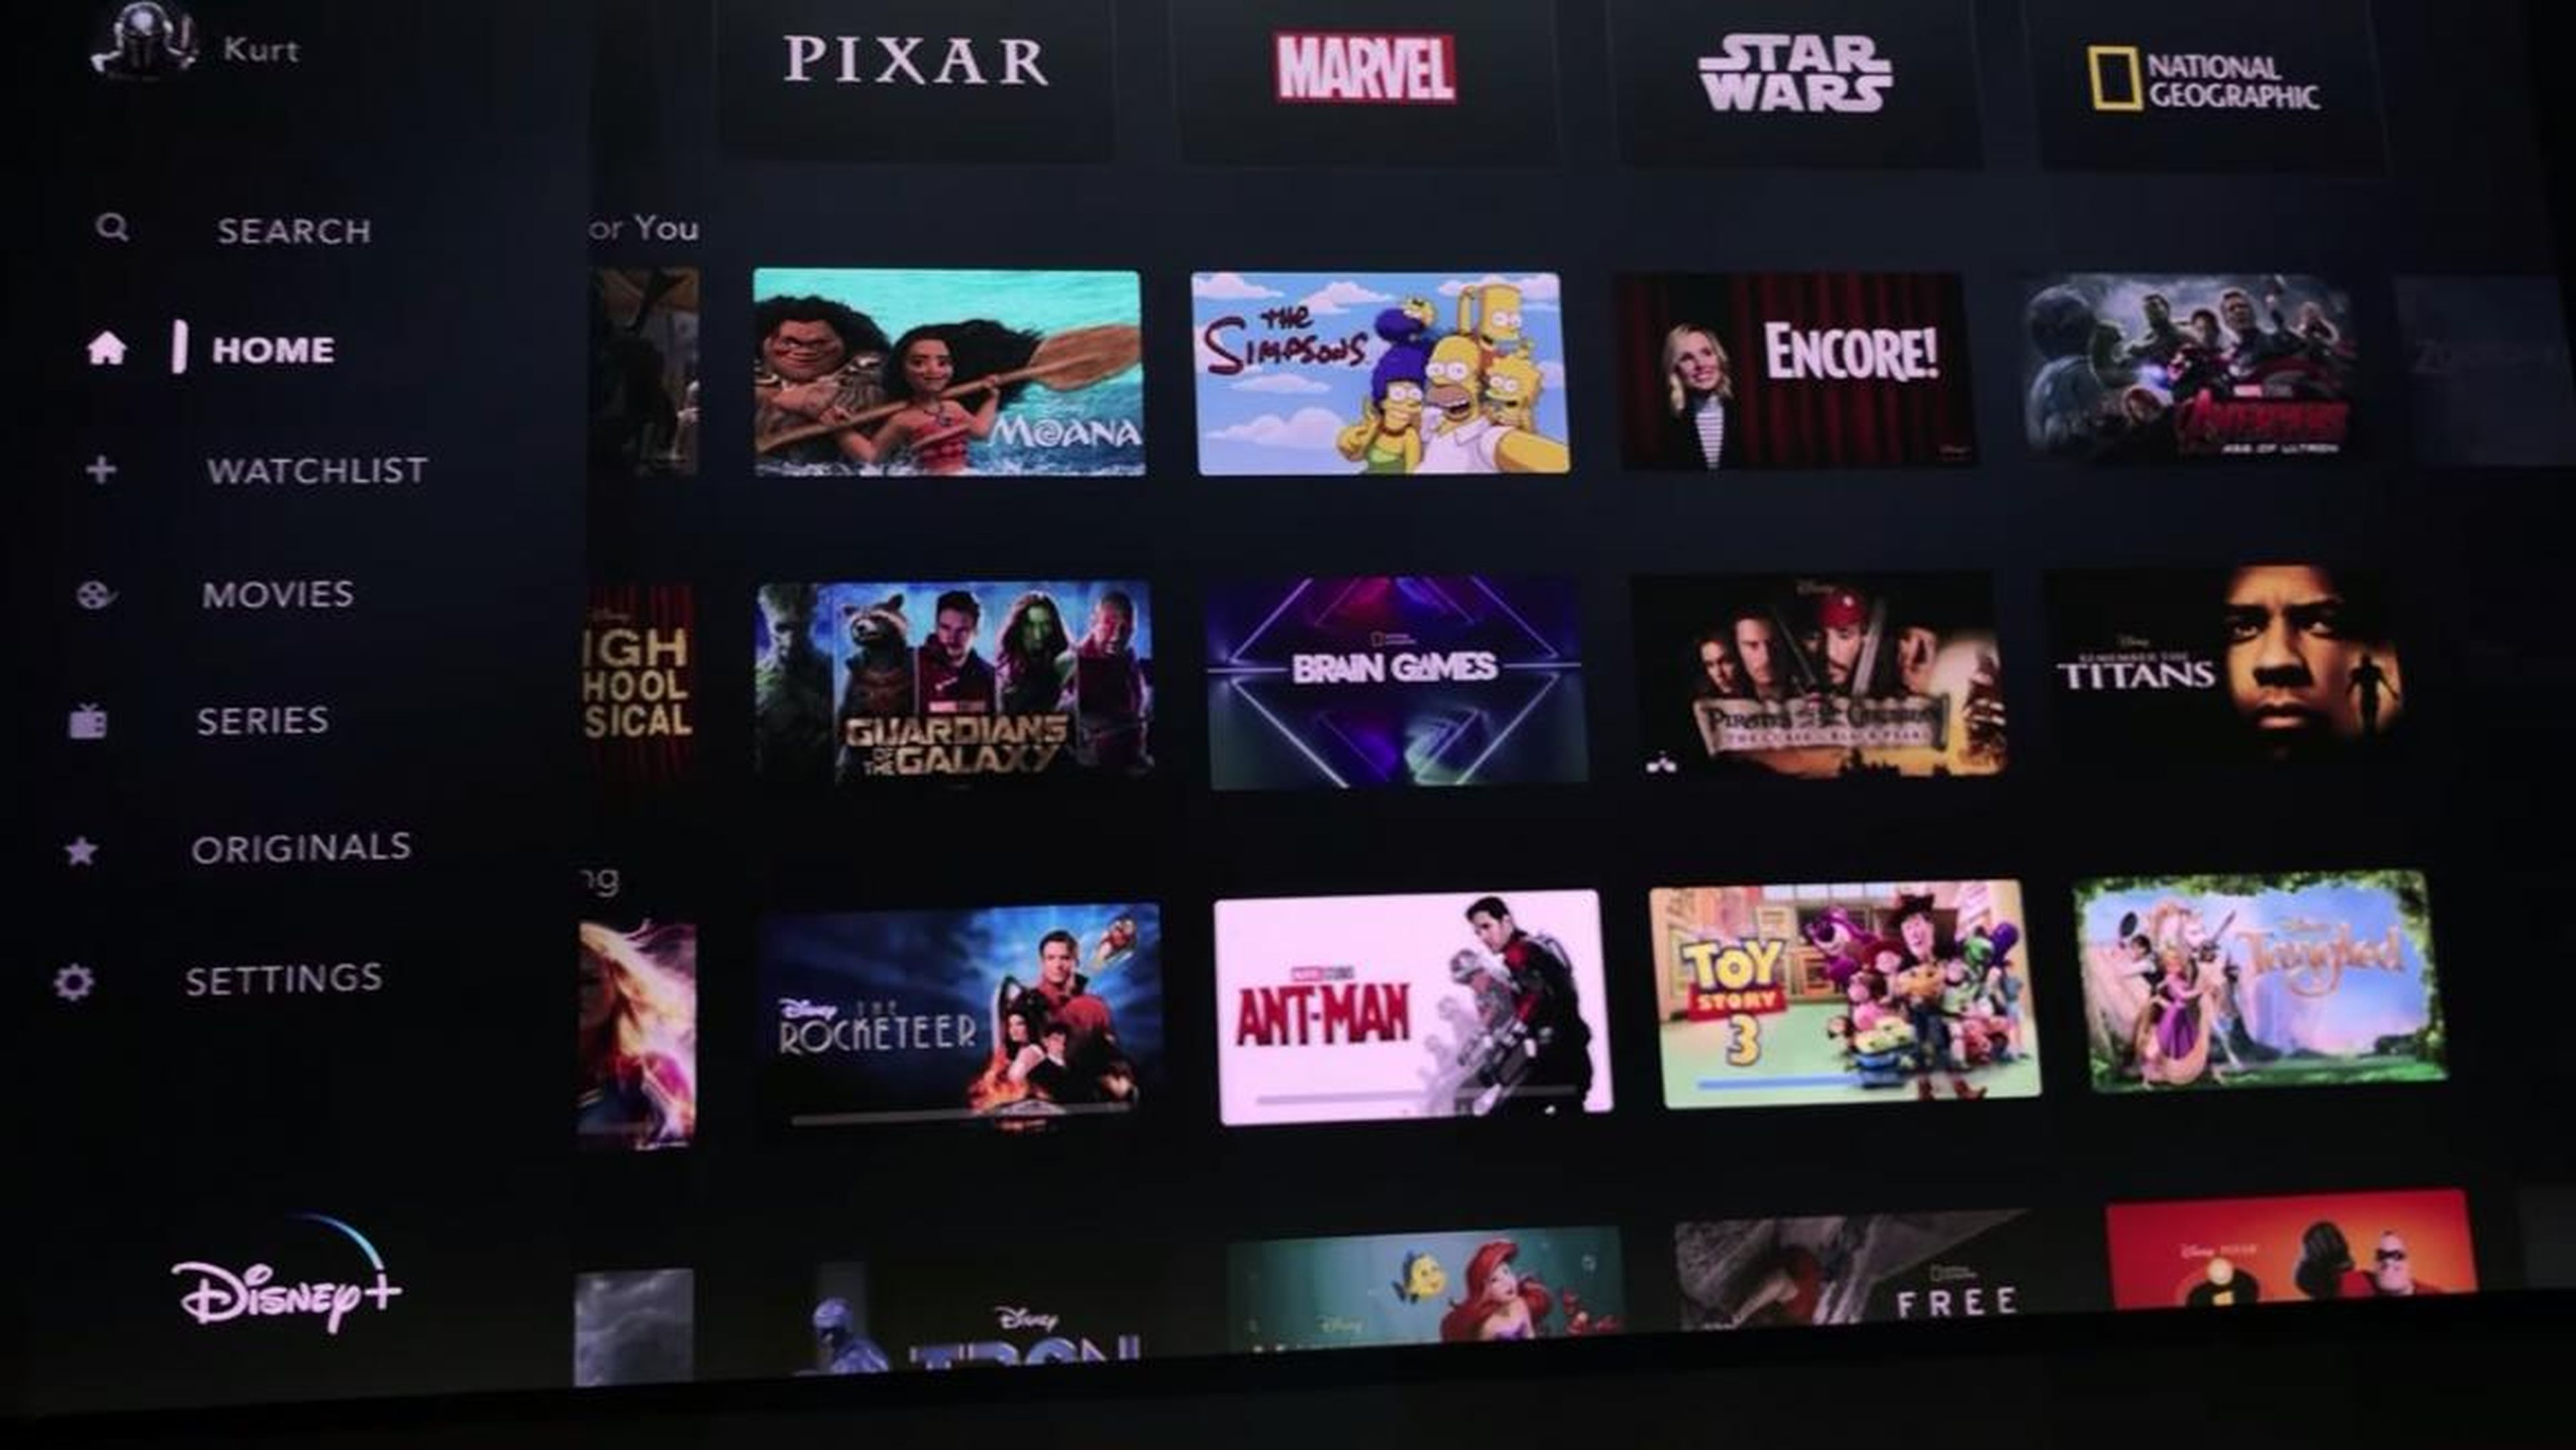 Similar to Netflix, you'll have a sidebar on the left where you can jump to different sections, like movies and originals.